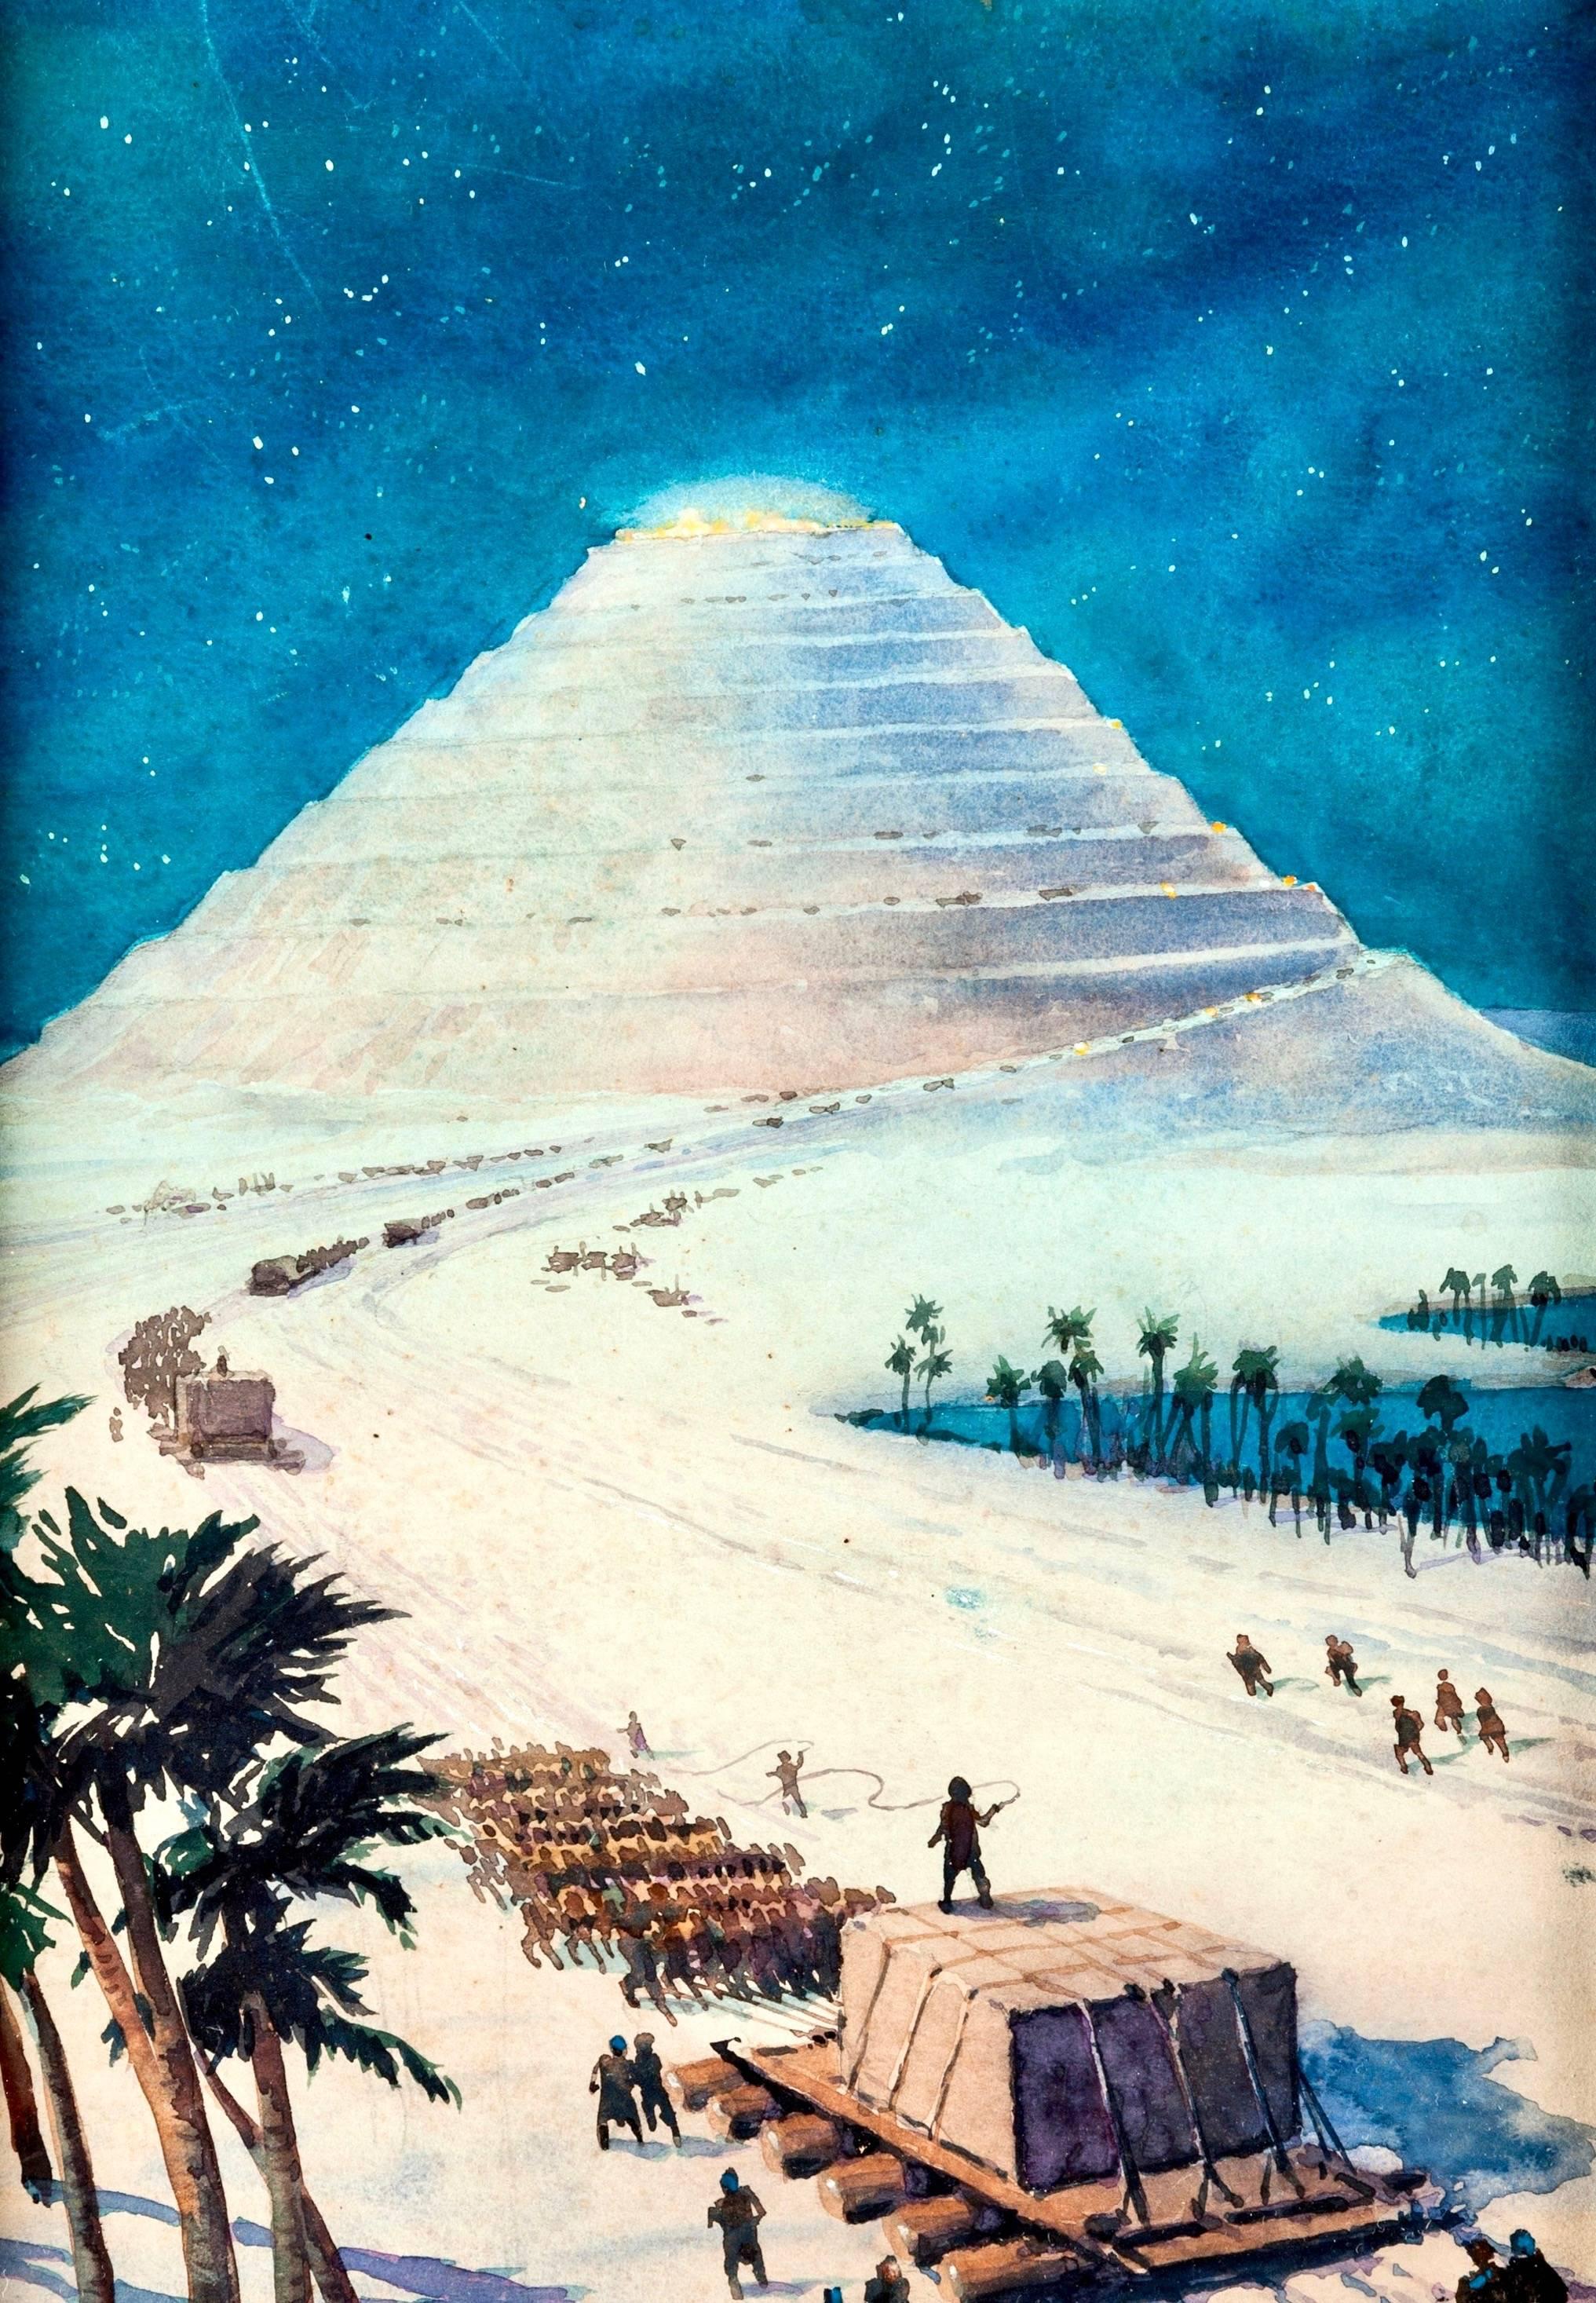 James B. Settles Landscape Painting - Amazing Stories "Wonders of the Ancient World: Building the Great Pyramid" 